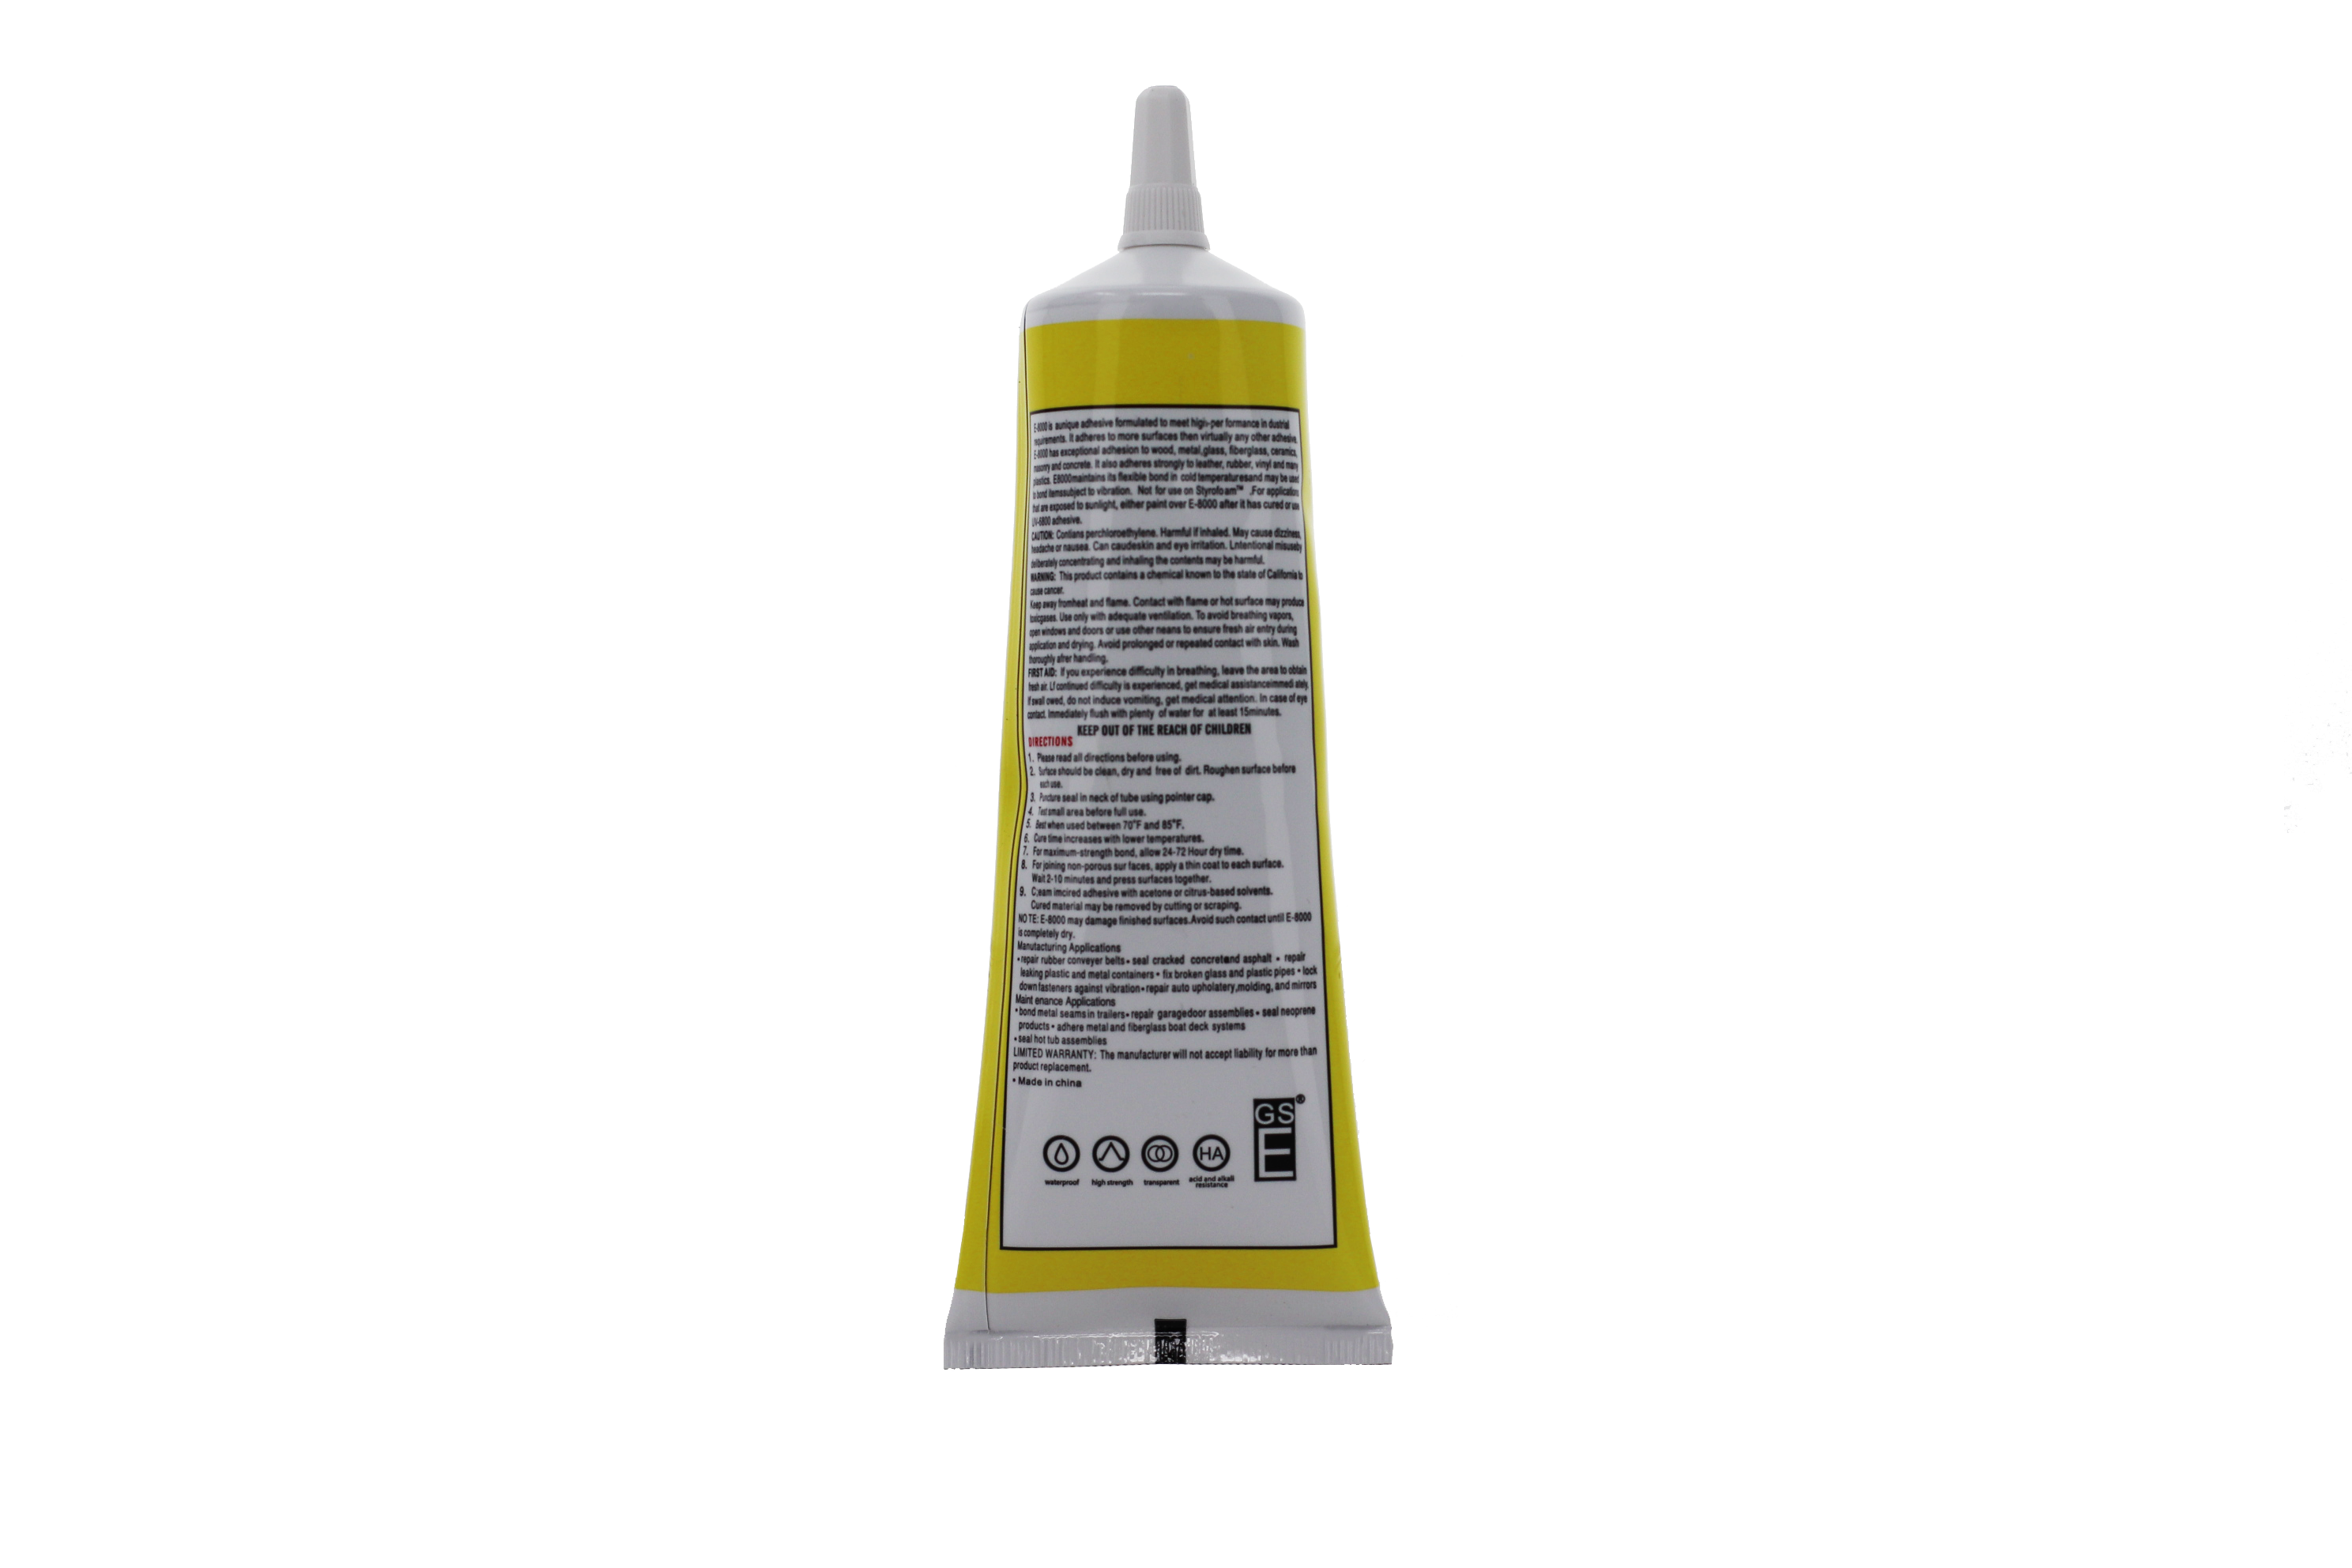 E8000 Glue 50 ml for Repairing Mobile Touch Panel Clear Adhesive – Parts  Wala